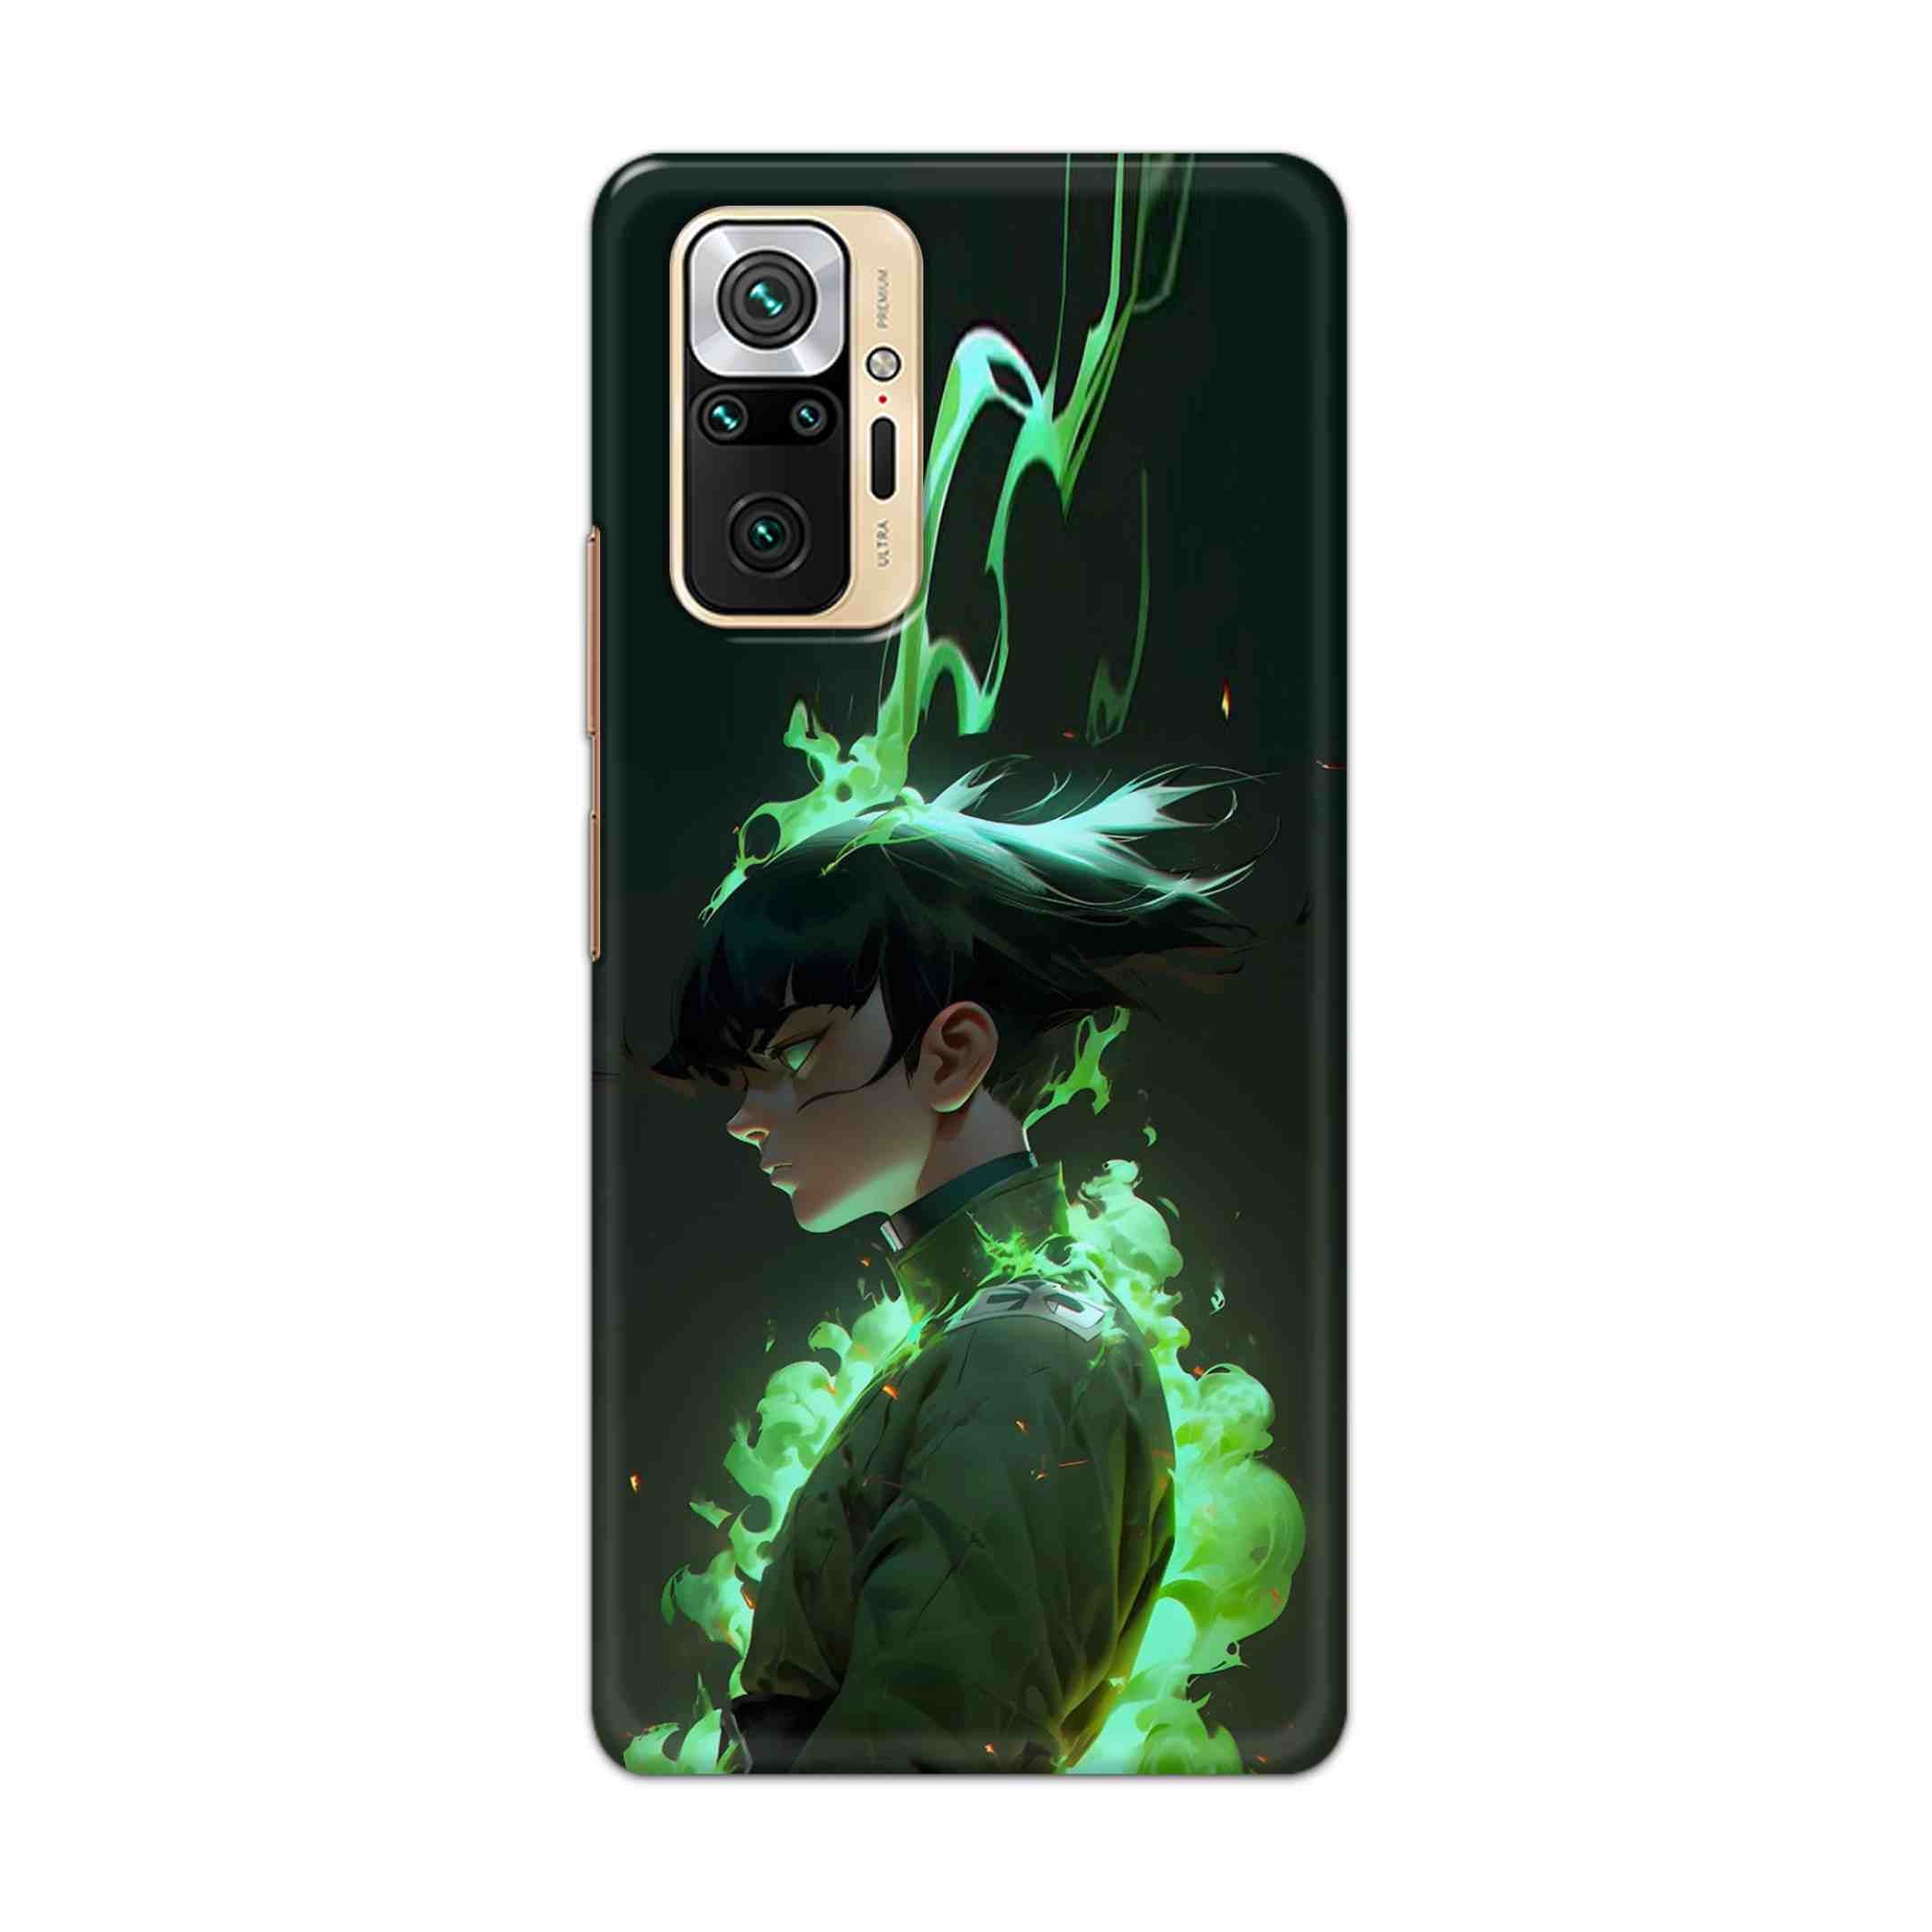 Buy Akira Hard Back Mobile Phone Case Cover For Redmi Note 10 Pro Online